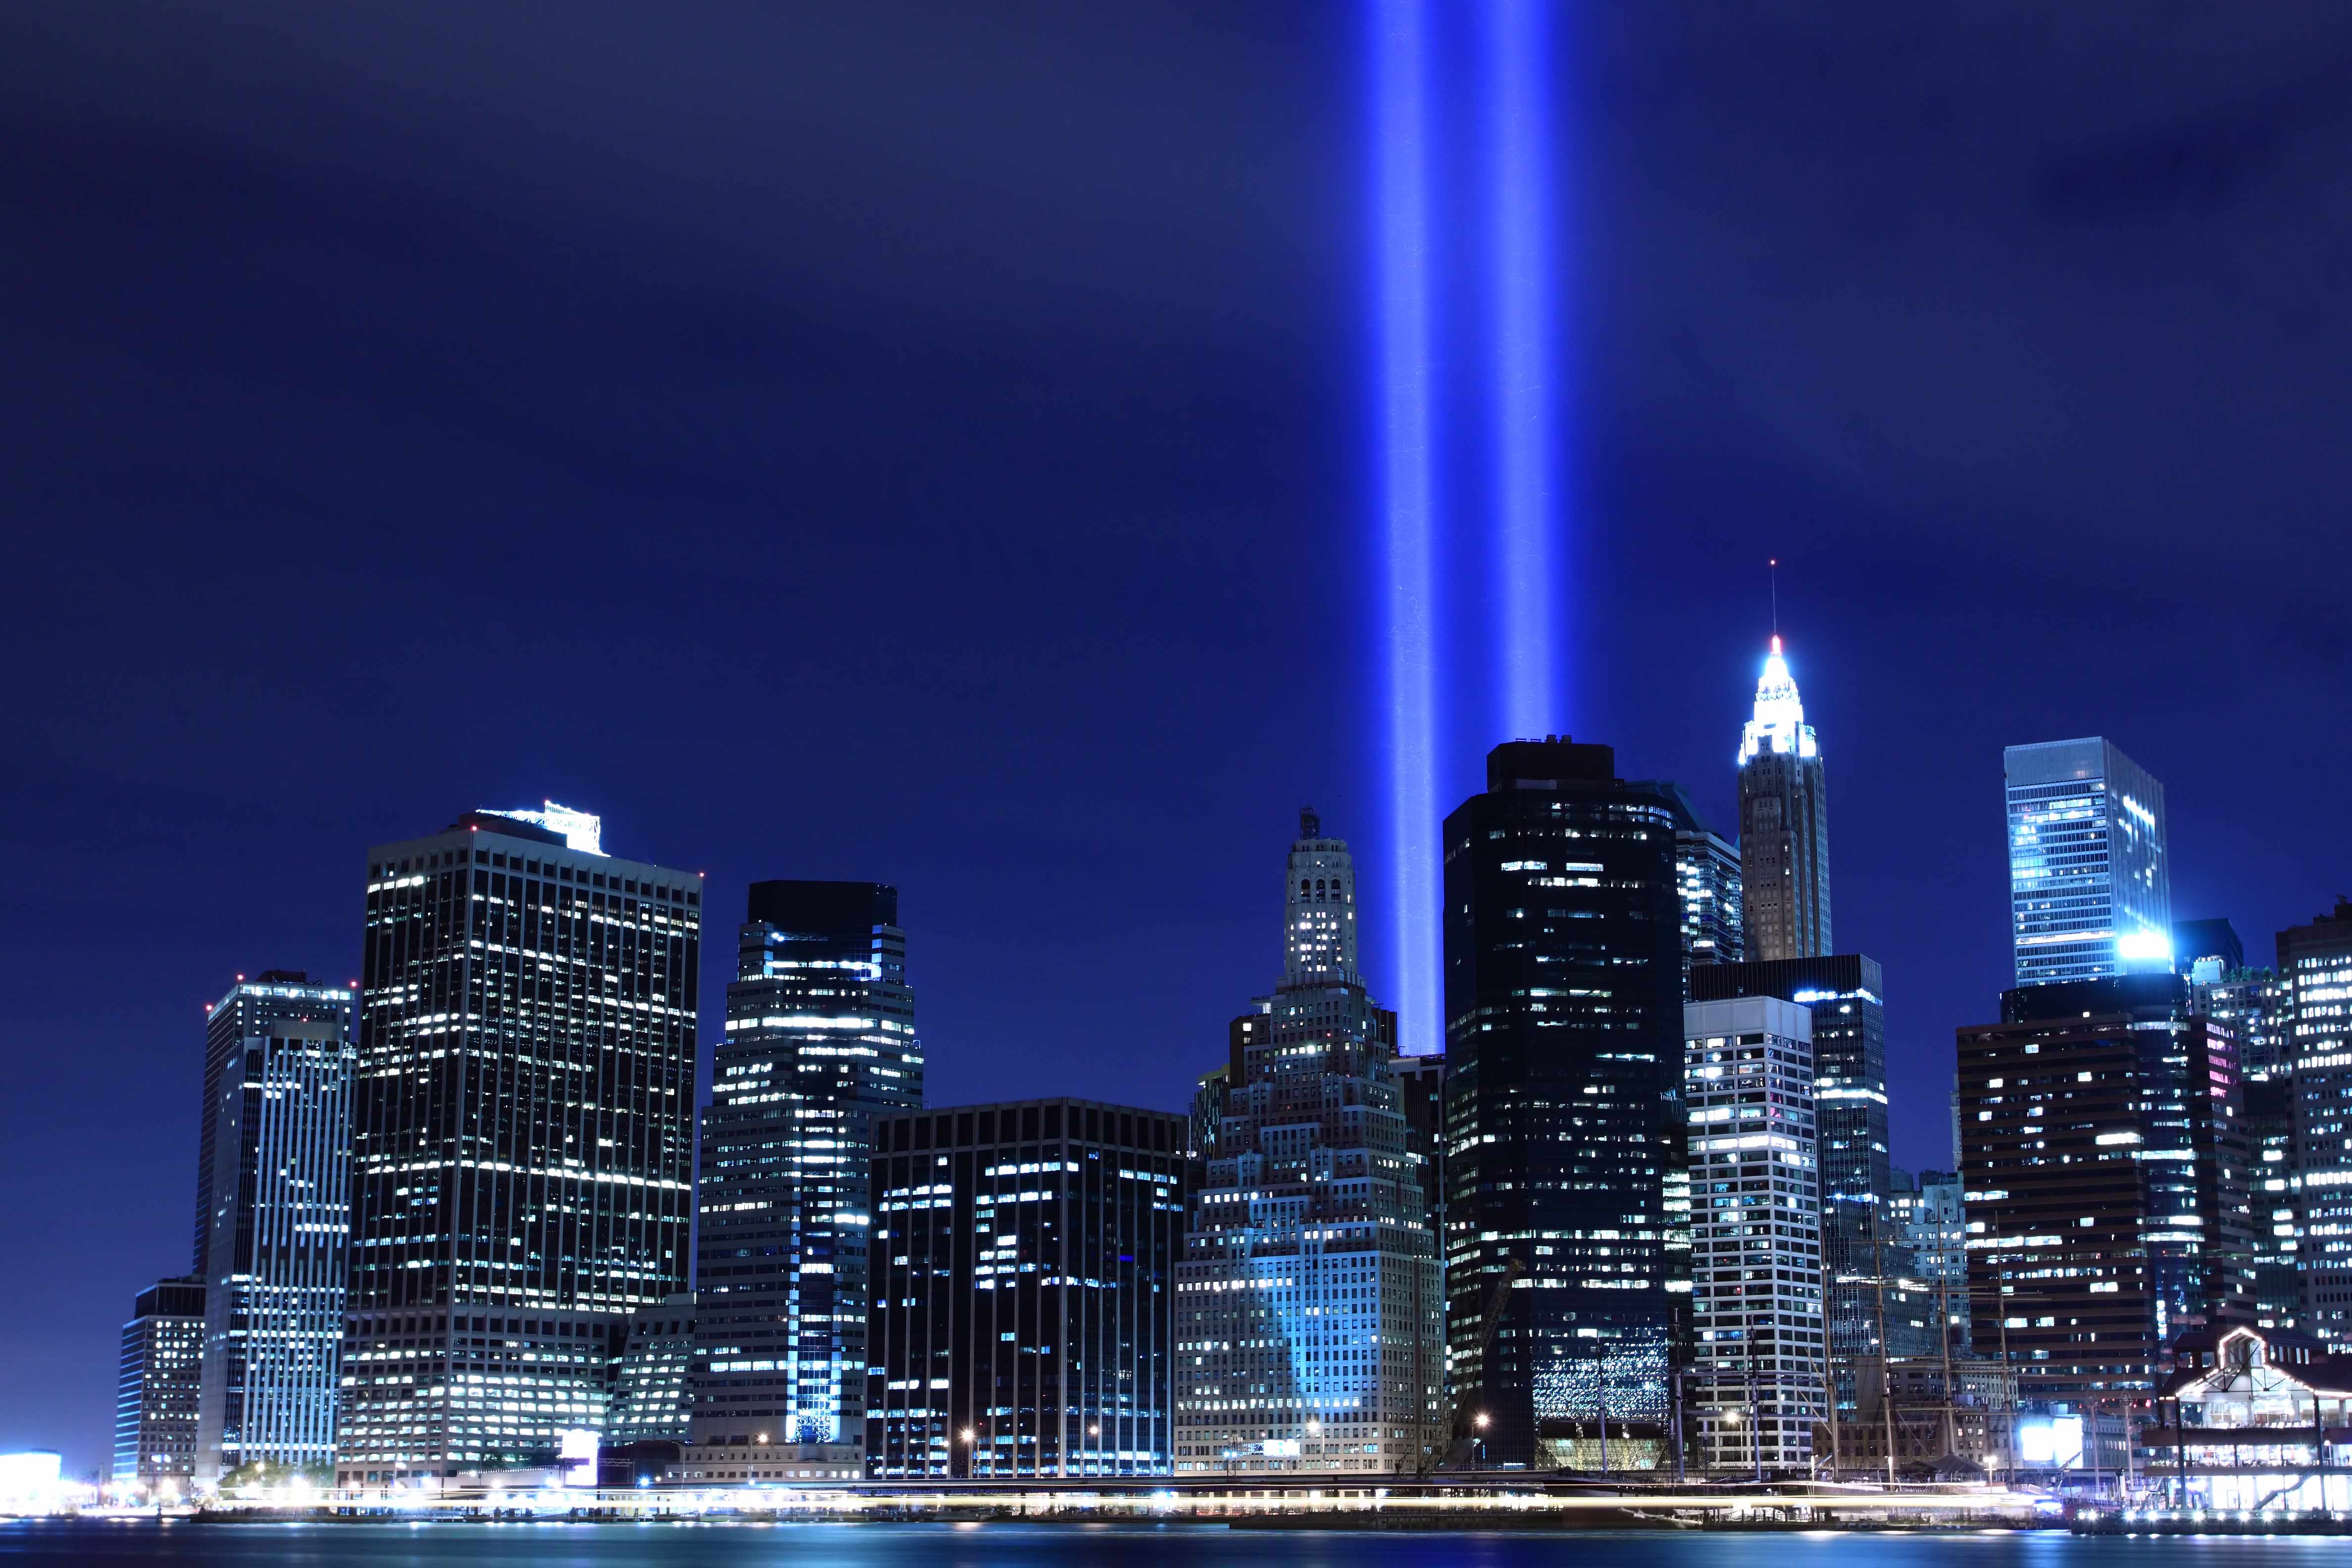 night skyline of New York City with two beams of light for 9-11 remembrance